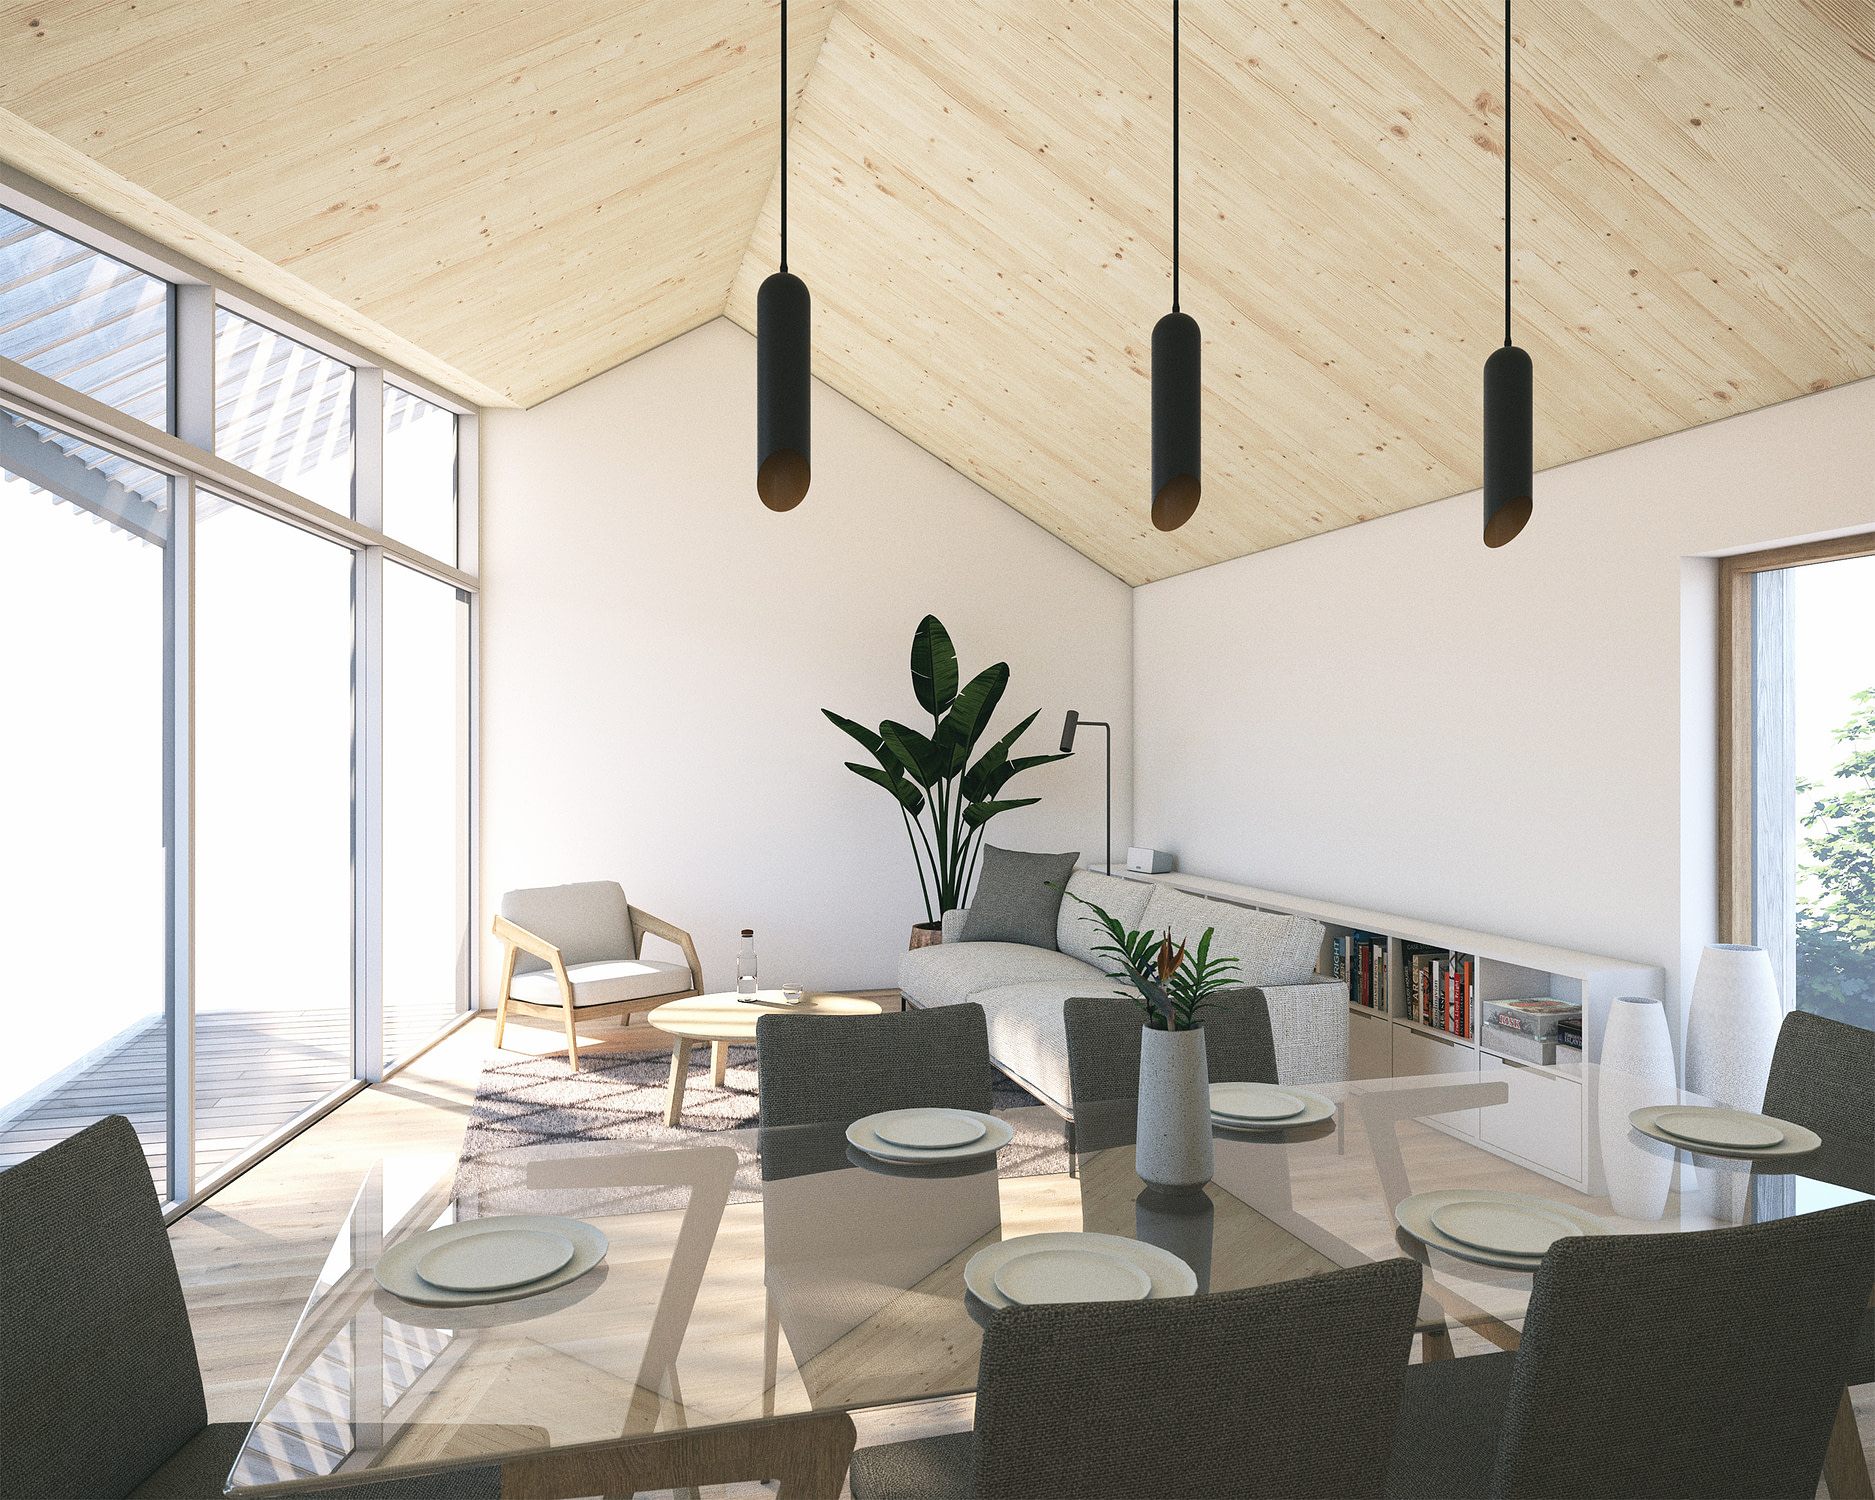 Computer render illustrating the first floor open plan living areas, with exposed cross-laminated timber (CLT) ceilings